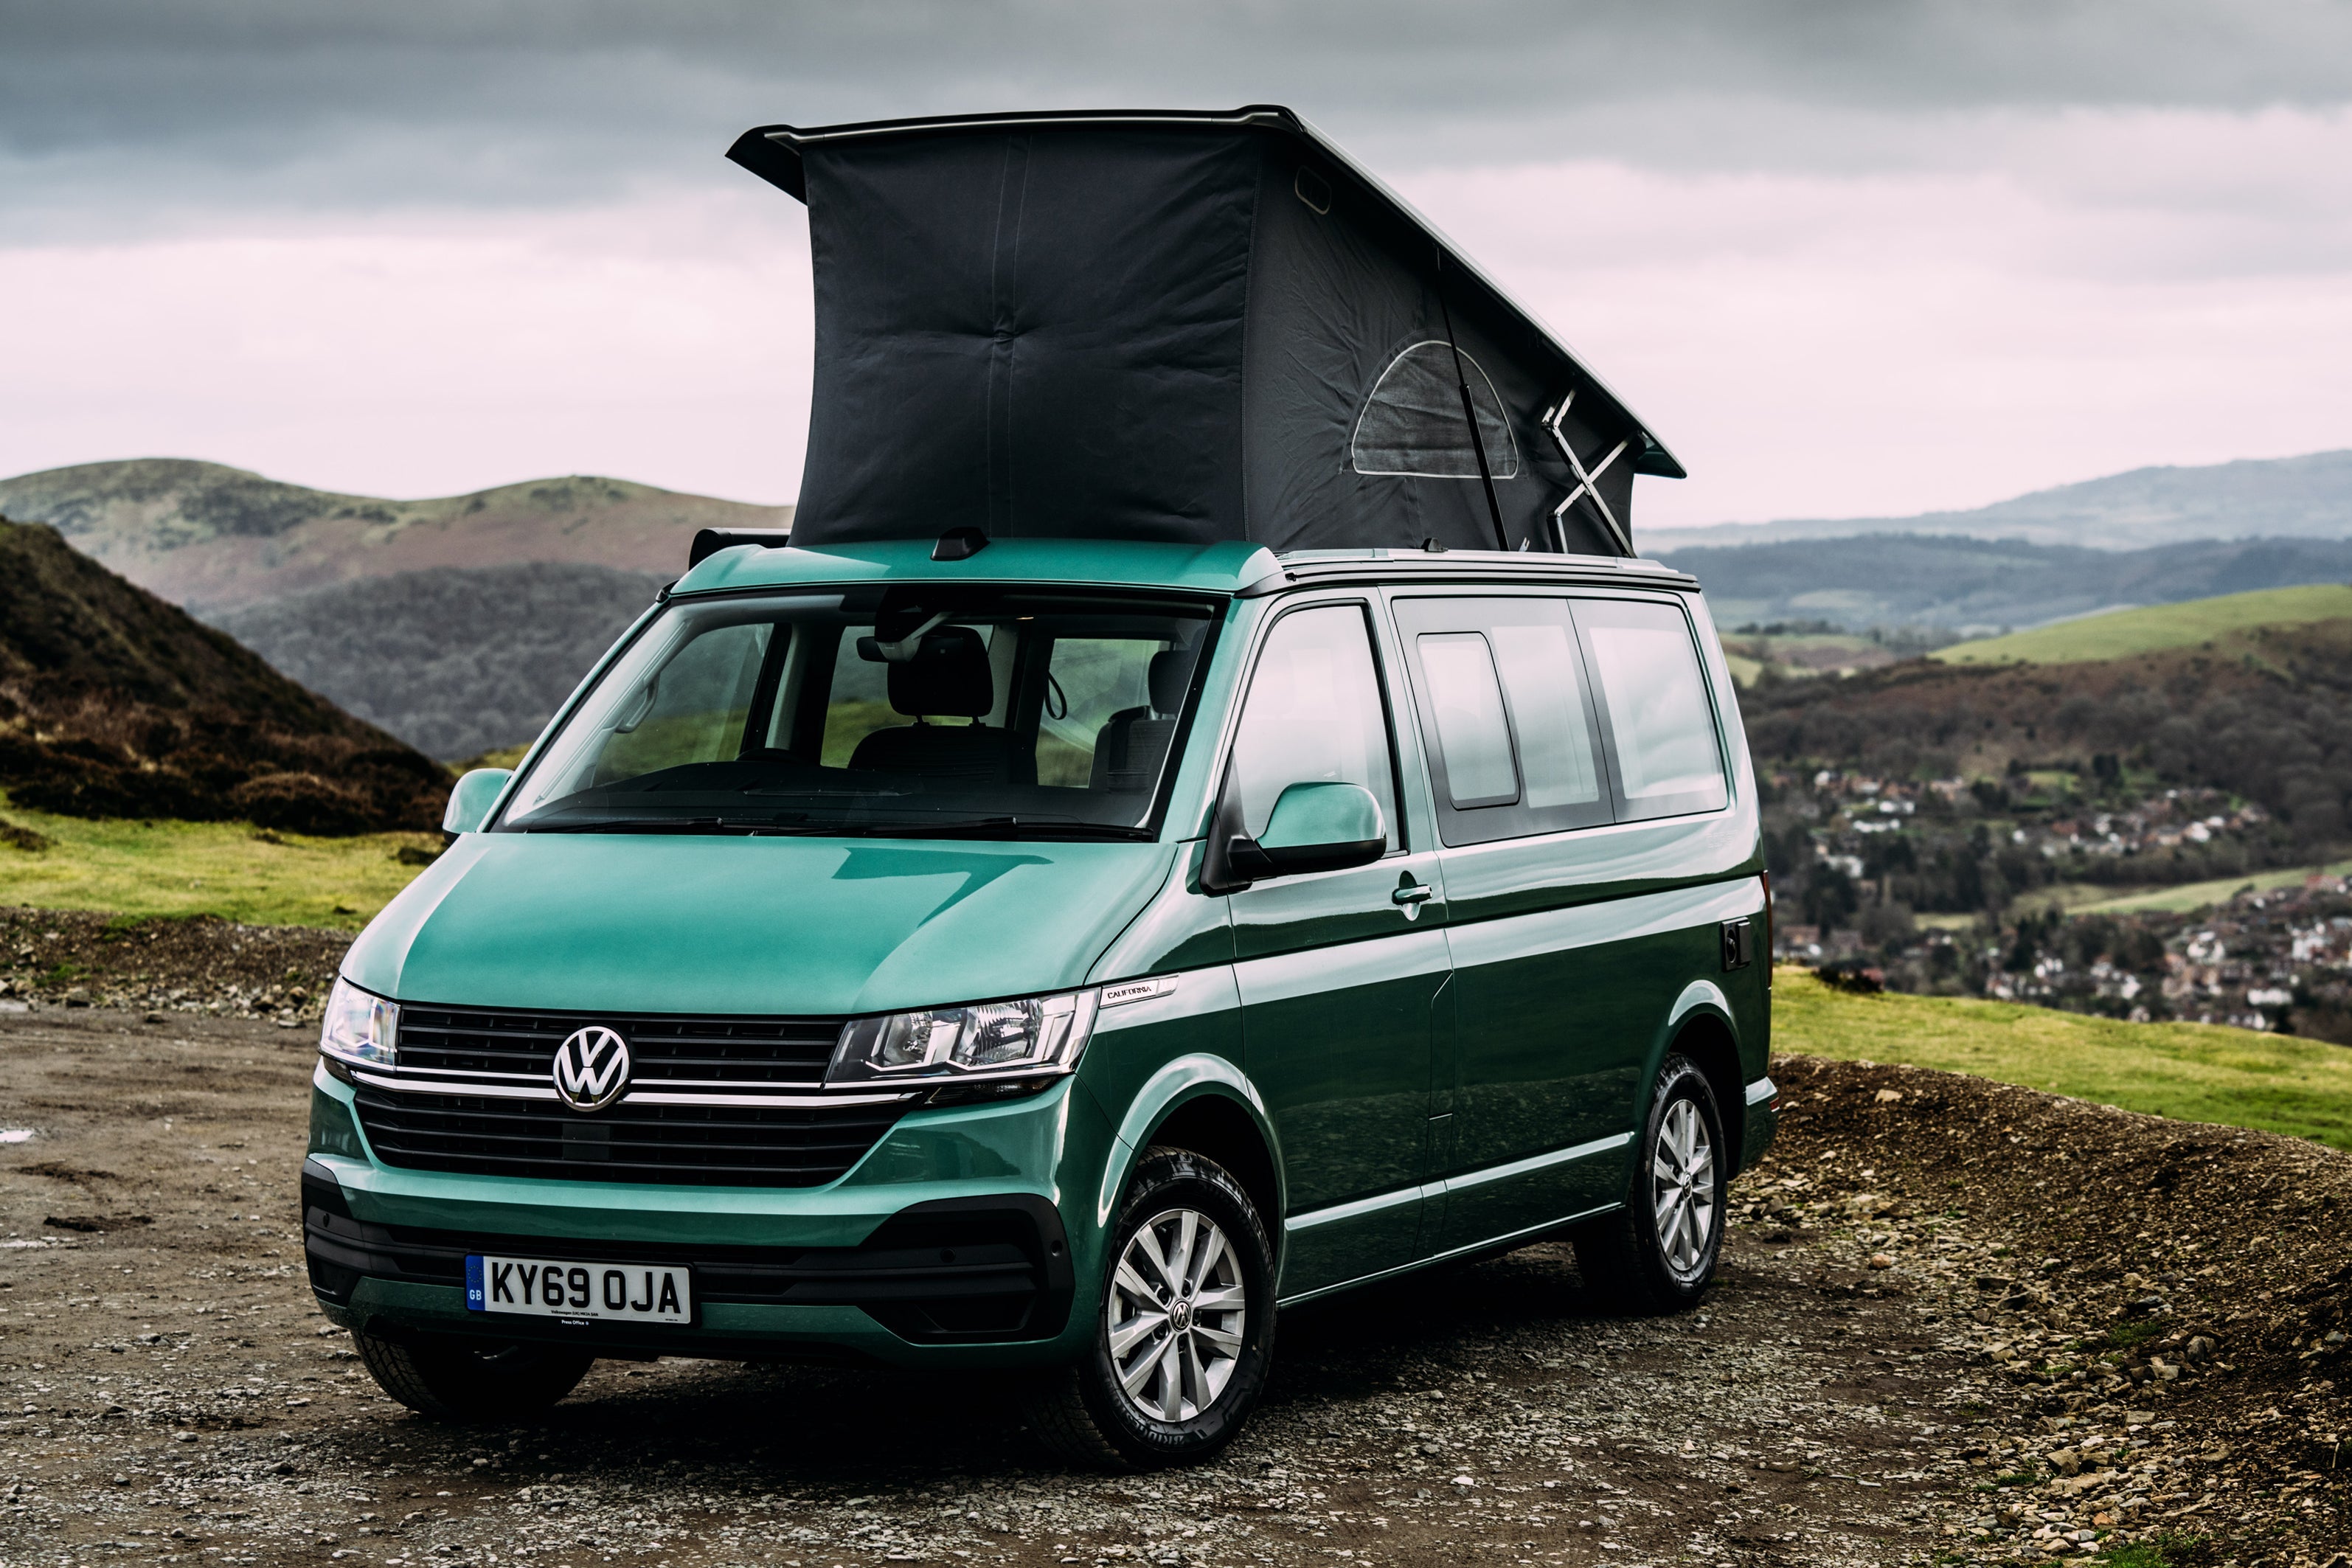 30K VW Caddy California mini-camper makes it over to the UK